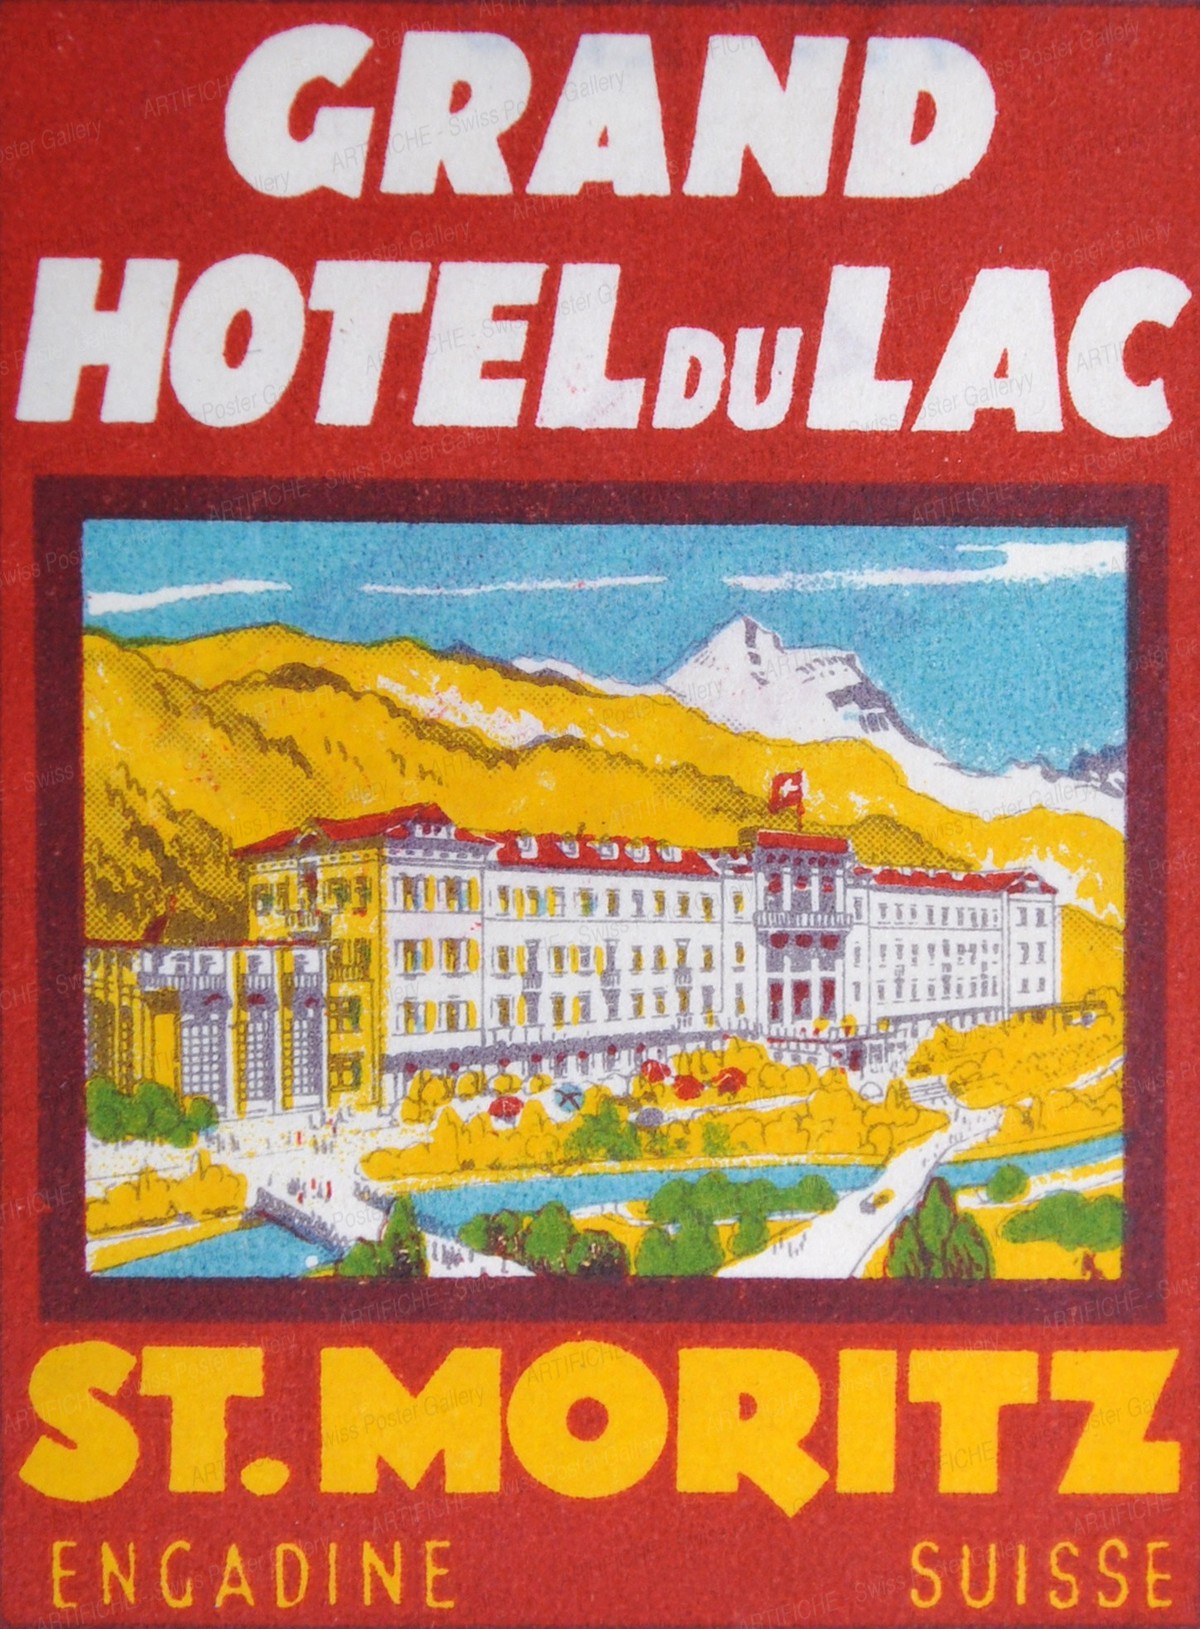 luggage hotel label, mounted; size 19 x 22 cm, Artist unknown